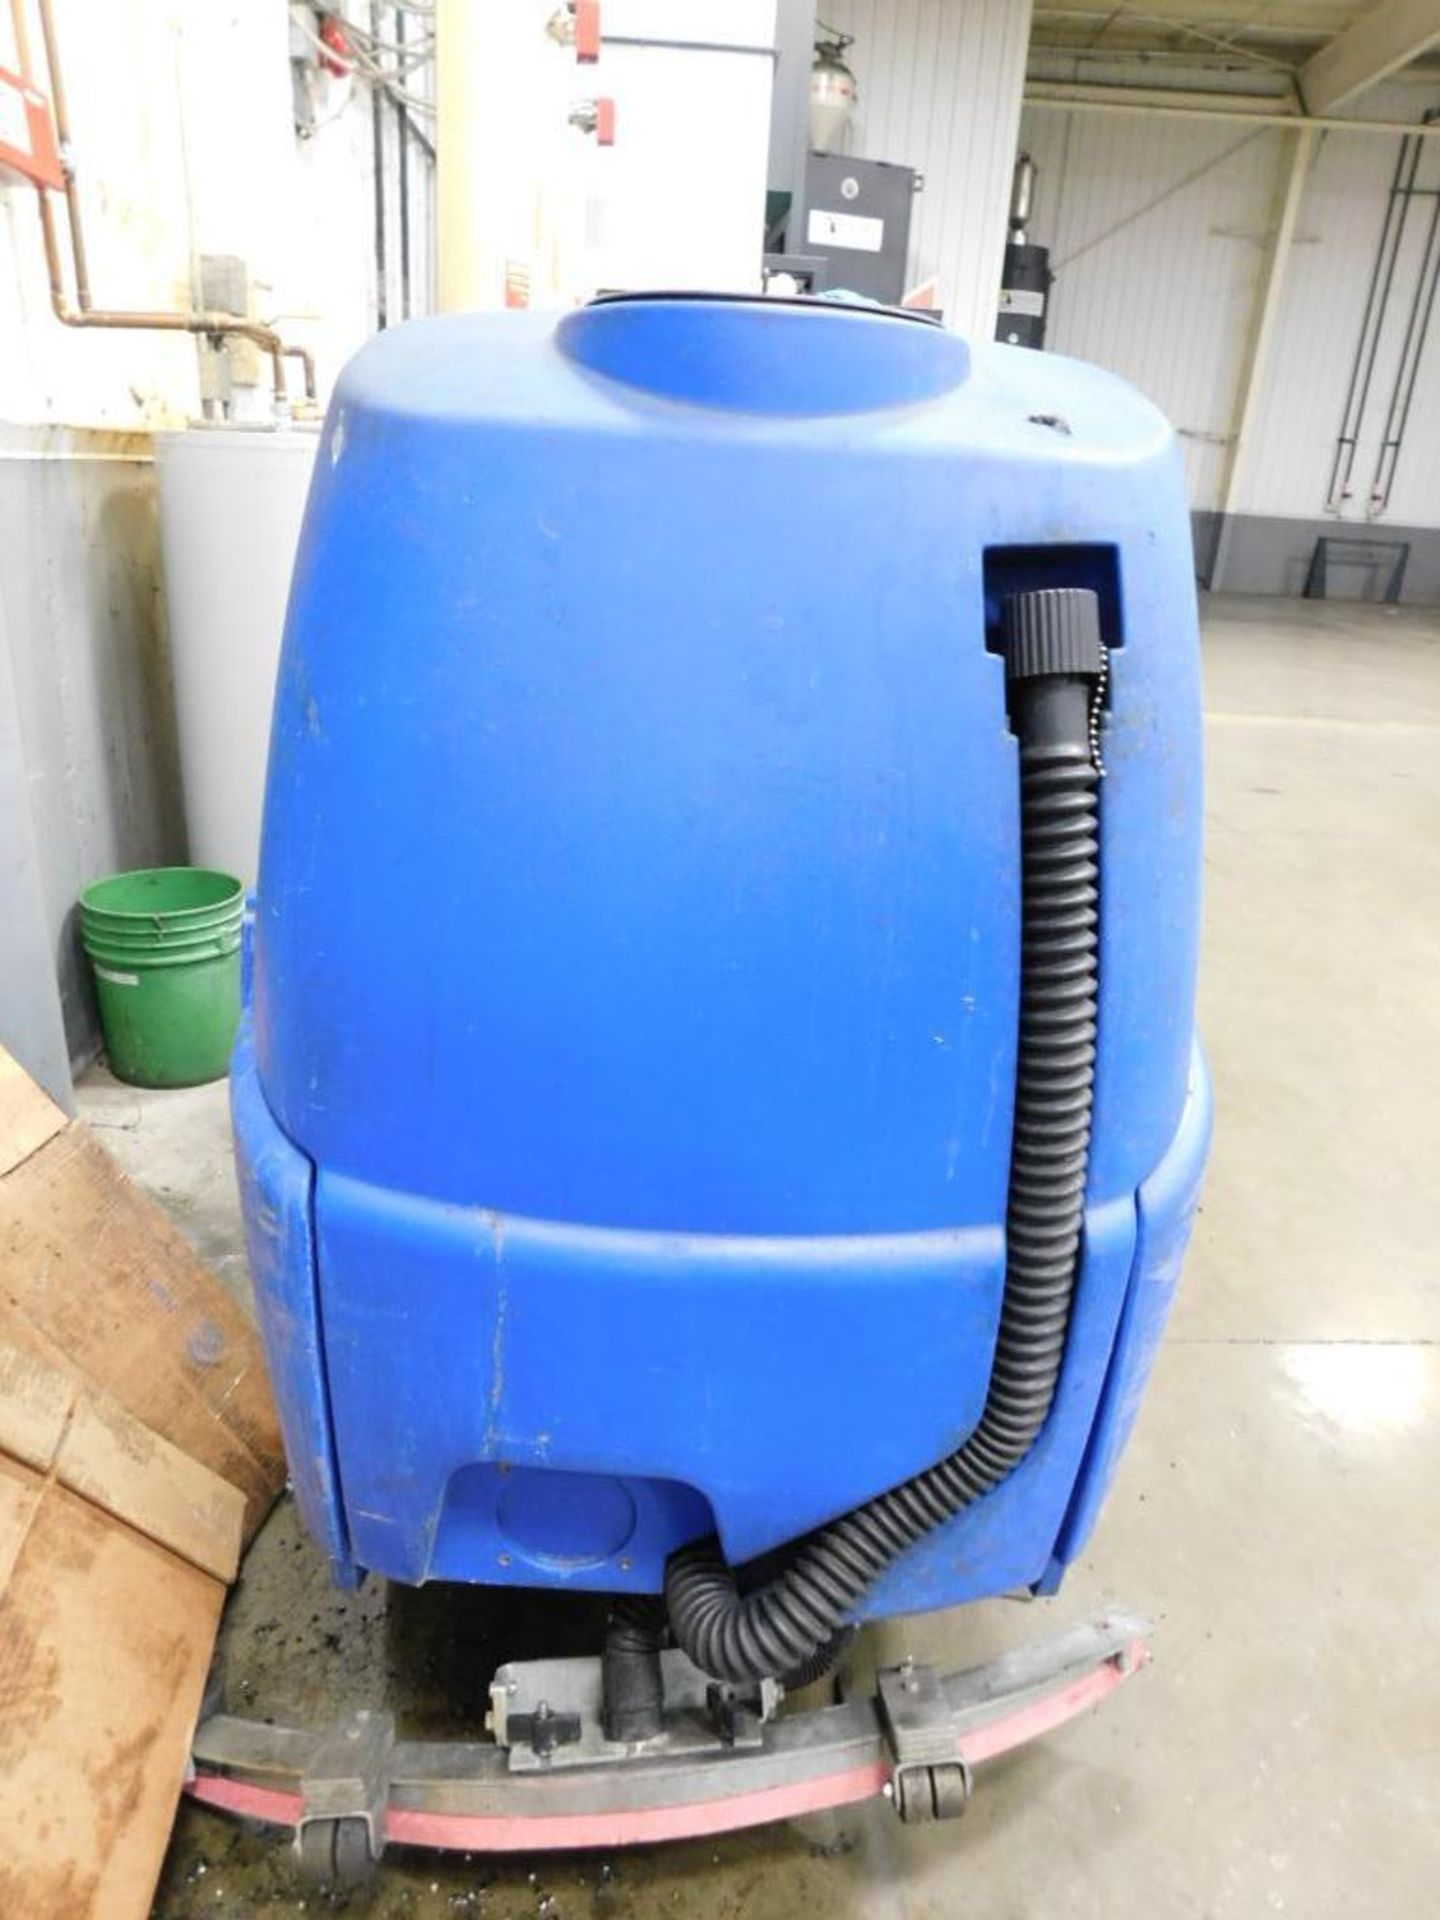 Clarke Focus 34 Floor Scrubber, 34" Wide, Ride On Type, Battery Powered, On Board Charger, S/N 30001 - Image 3 of 5